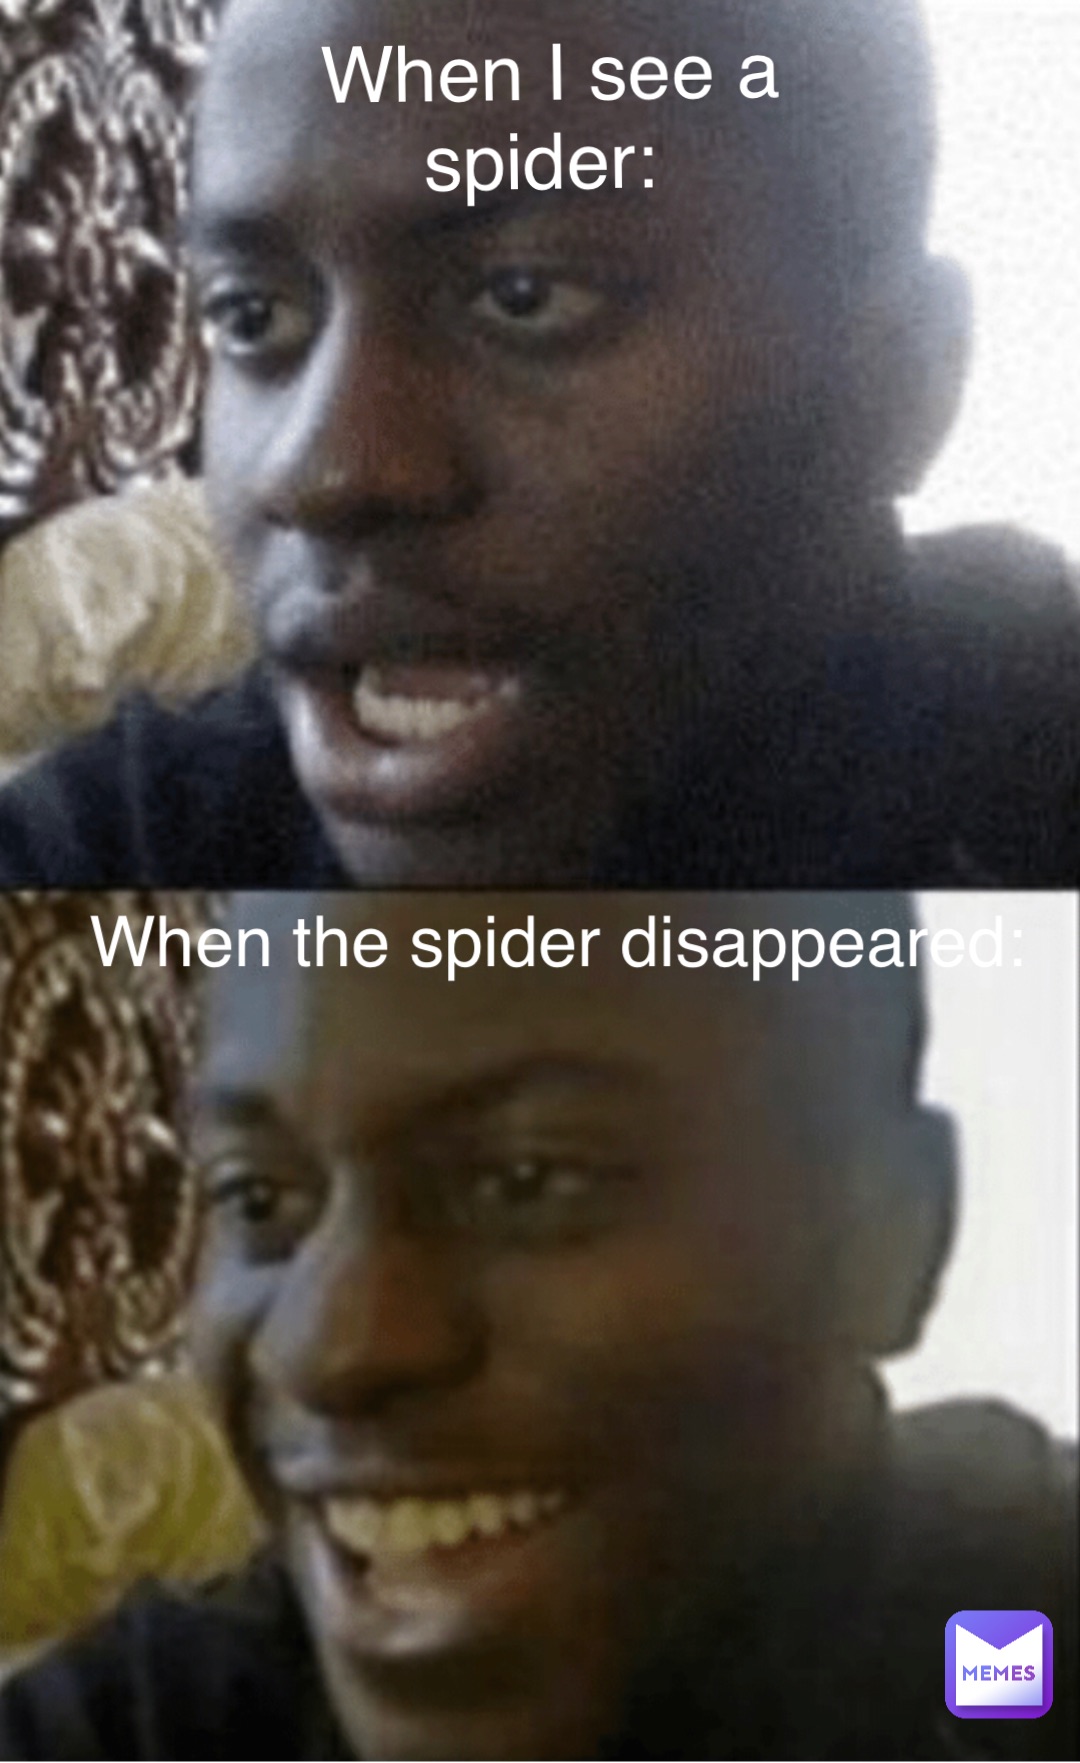 When I see a spider: When the spider disappeared: